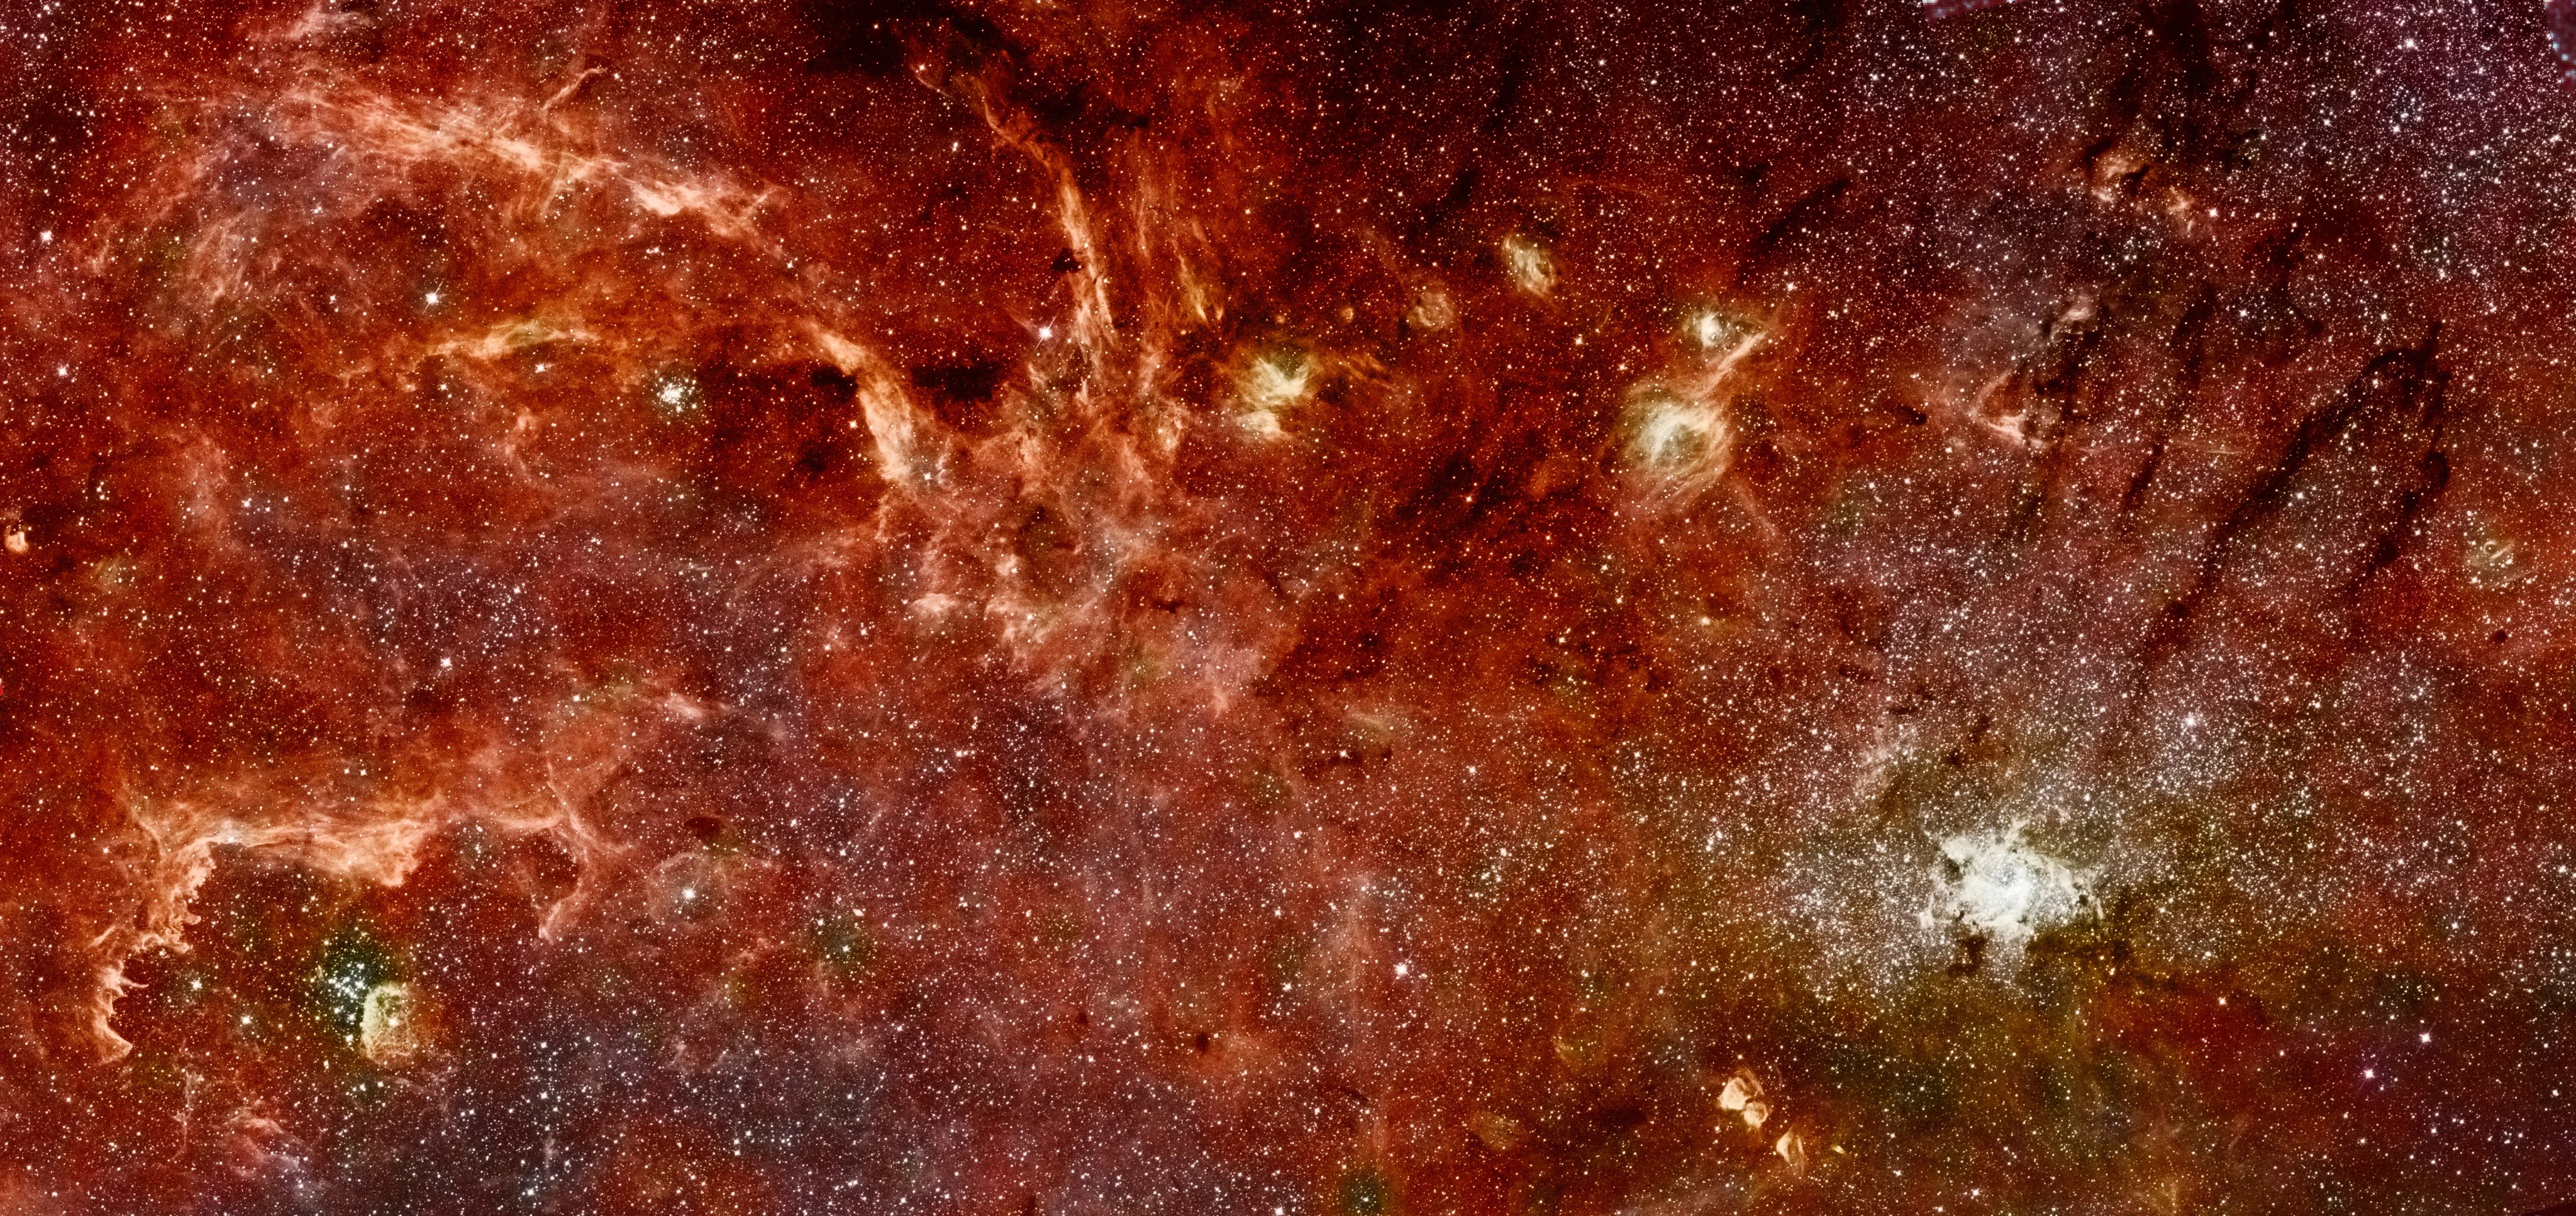 Hubble and Spitzer image of the Galactic Core